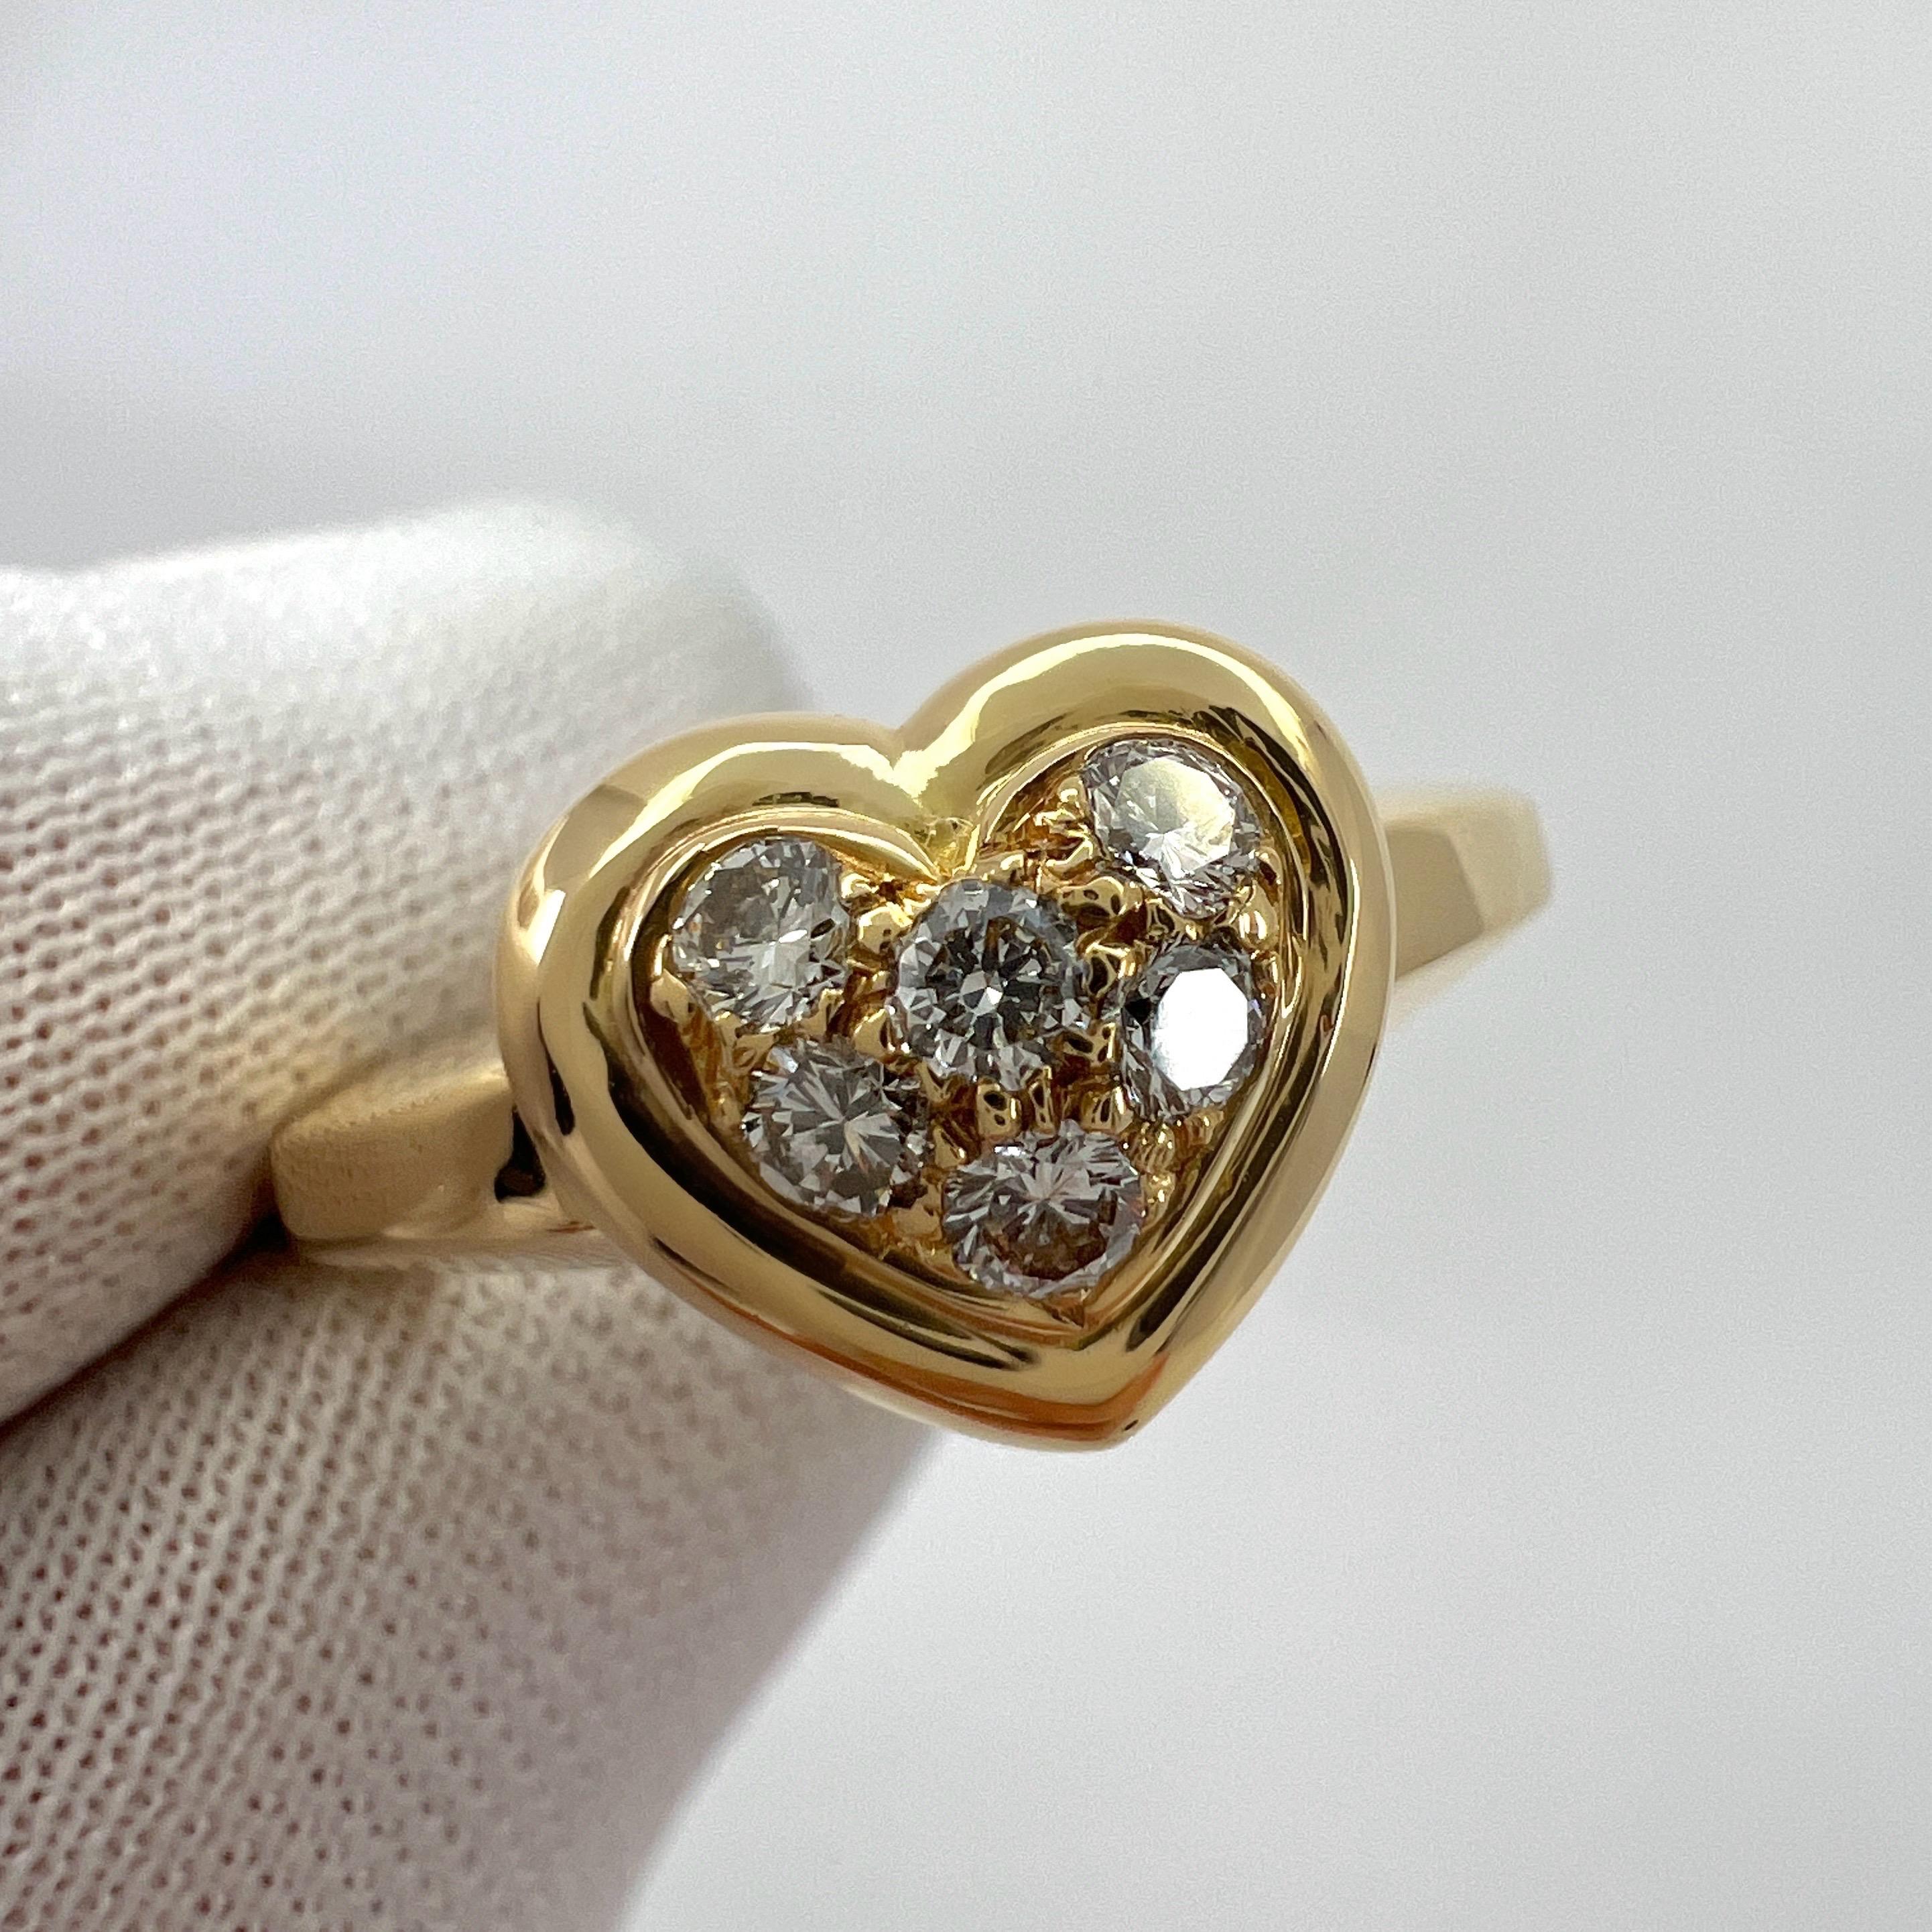 Rare Vintage Van Cleef & Arpels 18k Yellow Gold Diamond Heart Ring And Pendant For Sale 6